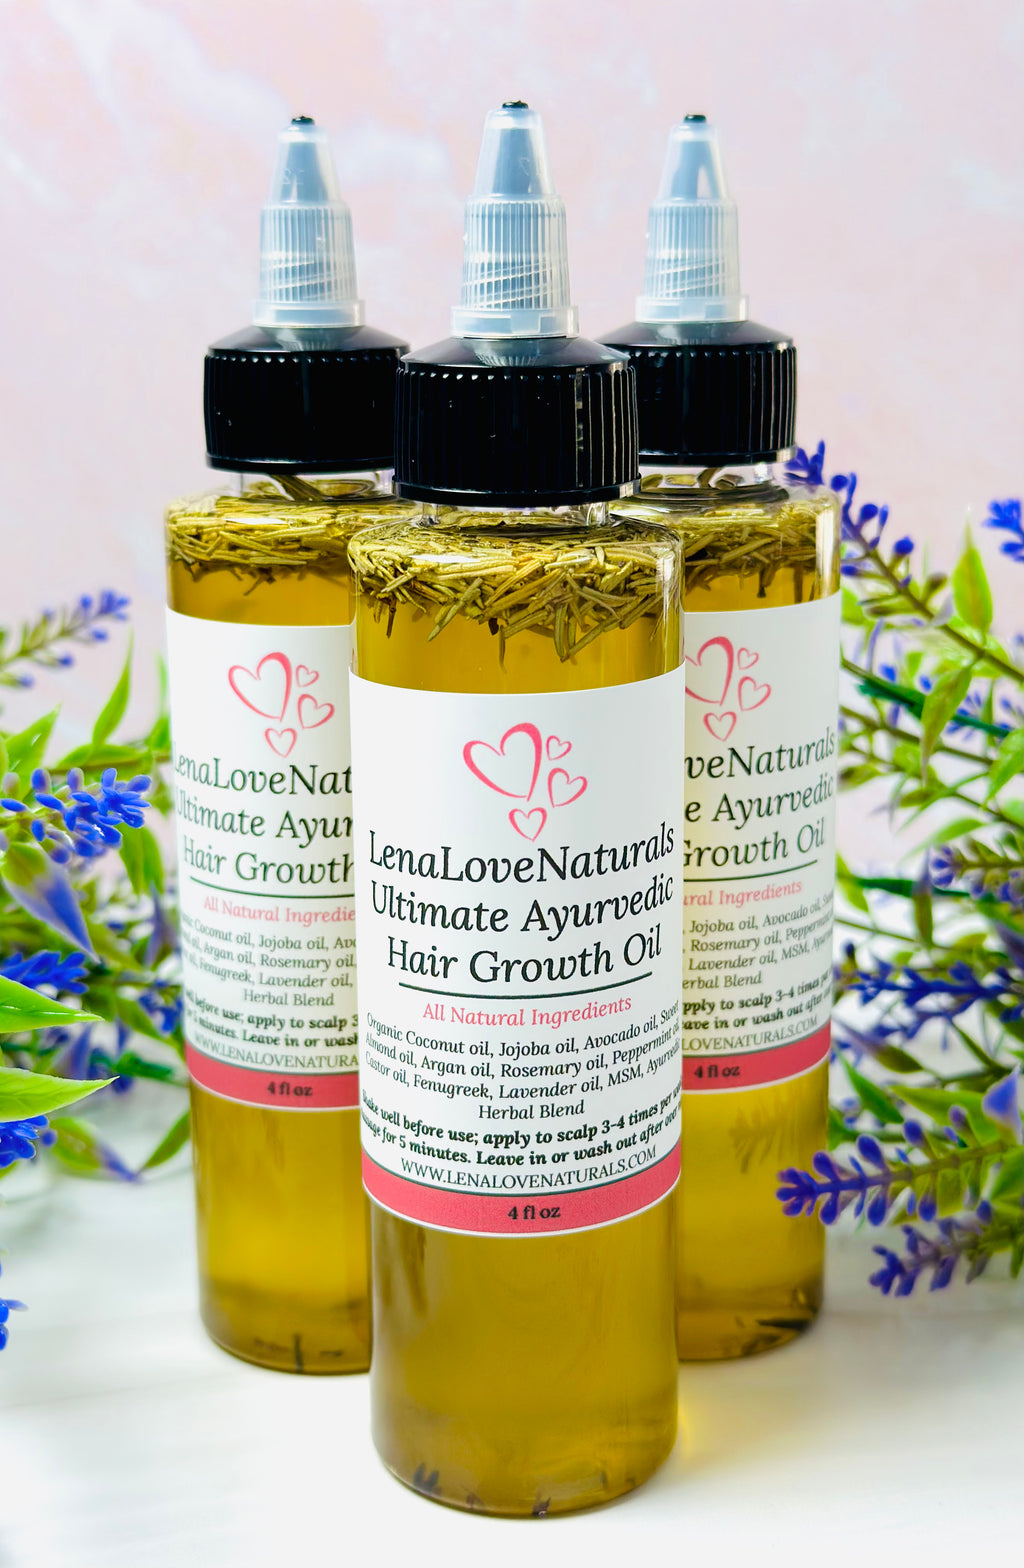 Natural hair growth oil infused with Rosemary for fast hair growth